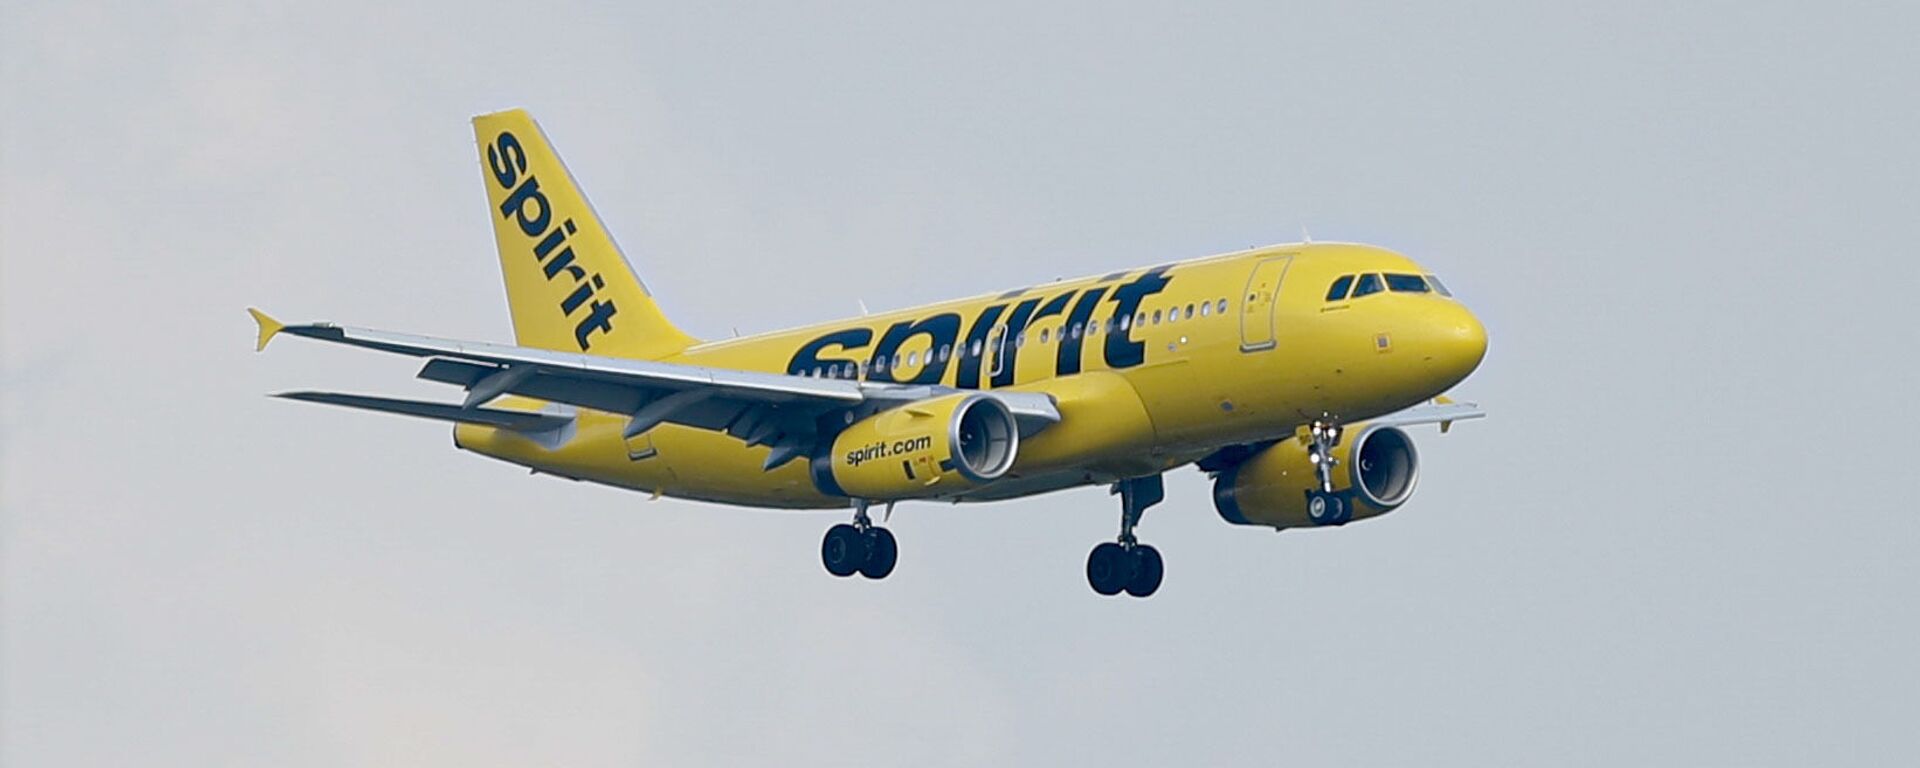 A Spirit Airlines jet comes in for a landing at the airport in Latrobe, Pa., Sunday, July 28, 2019. - Sputnik International, 1920, 02.03.2023